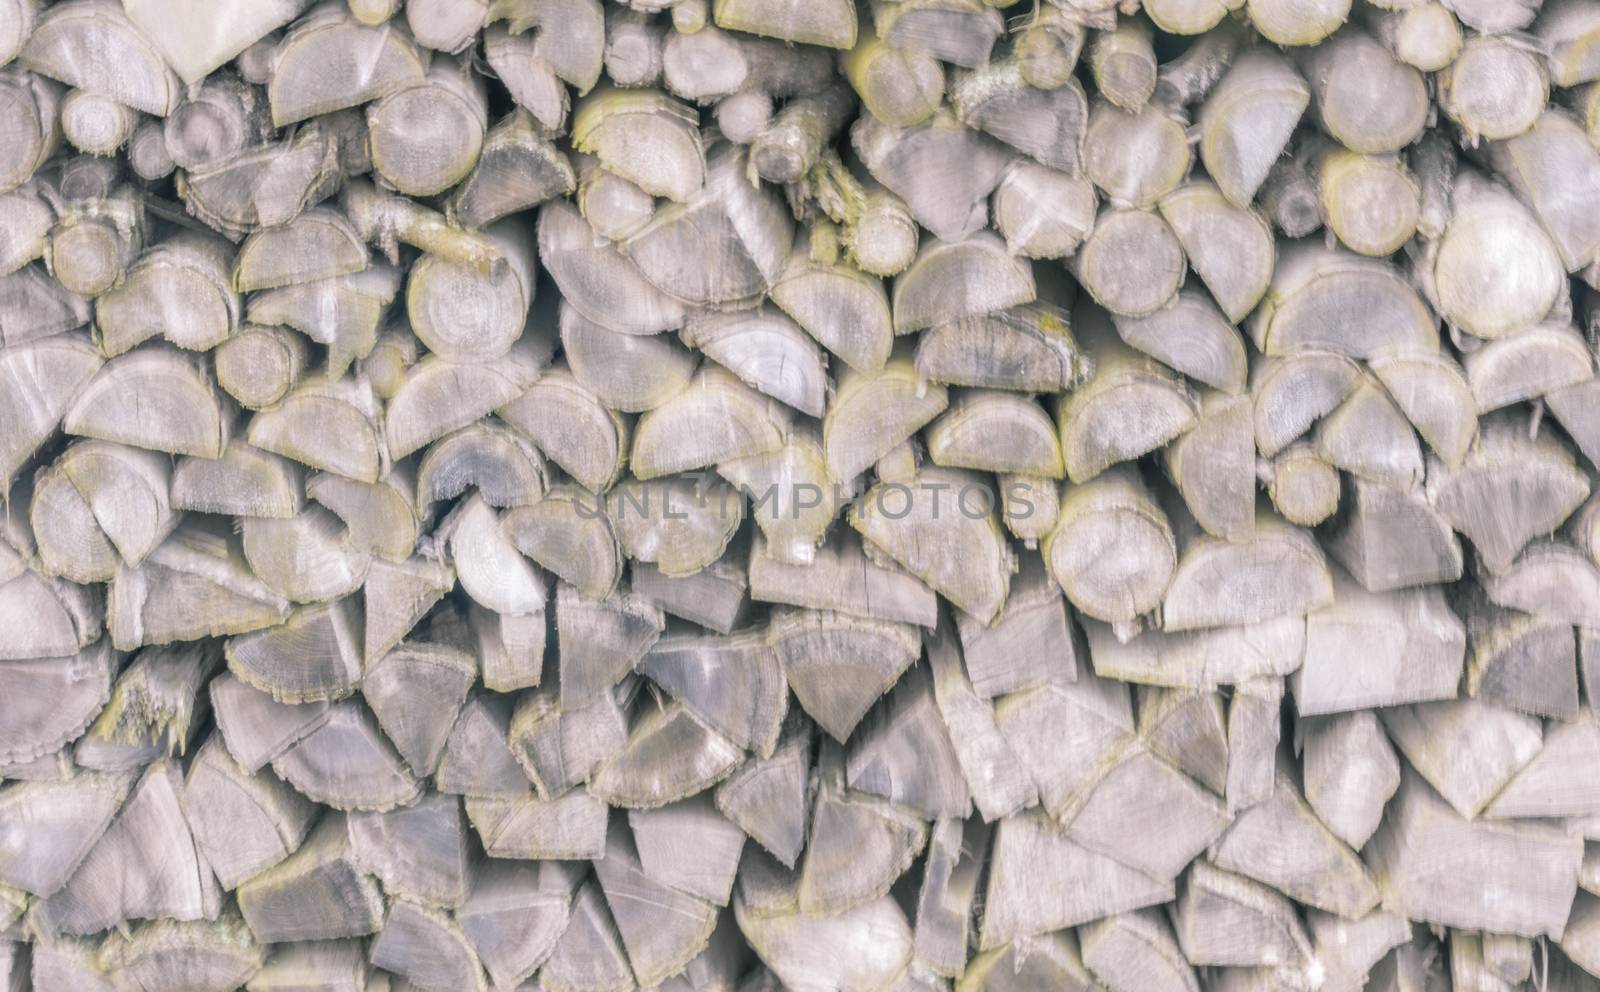 Blurry background with a pile of chopped firewood logs in different shapes